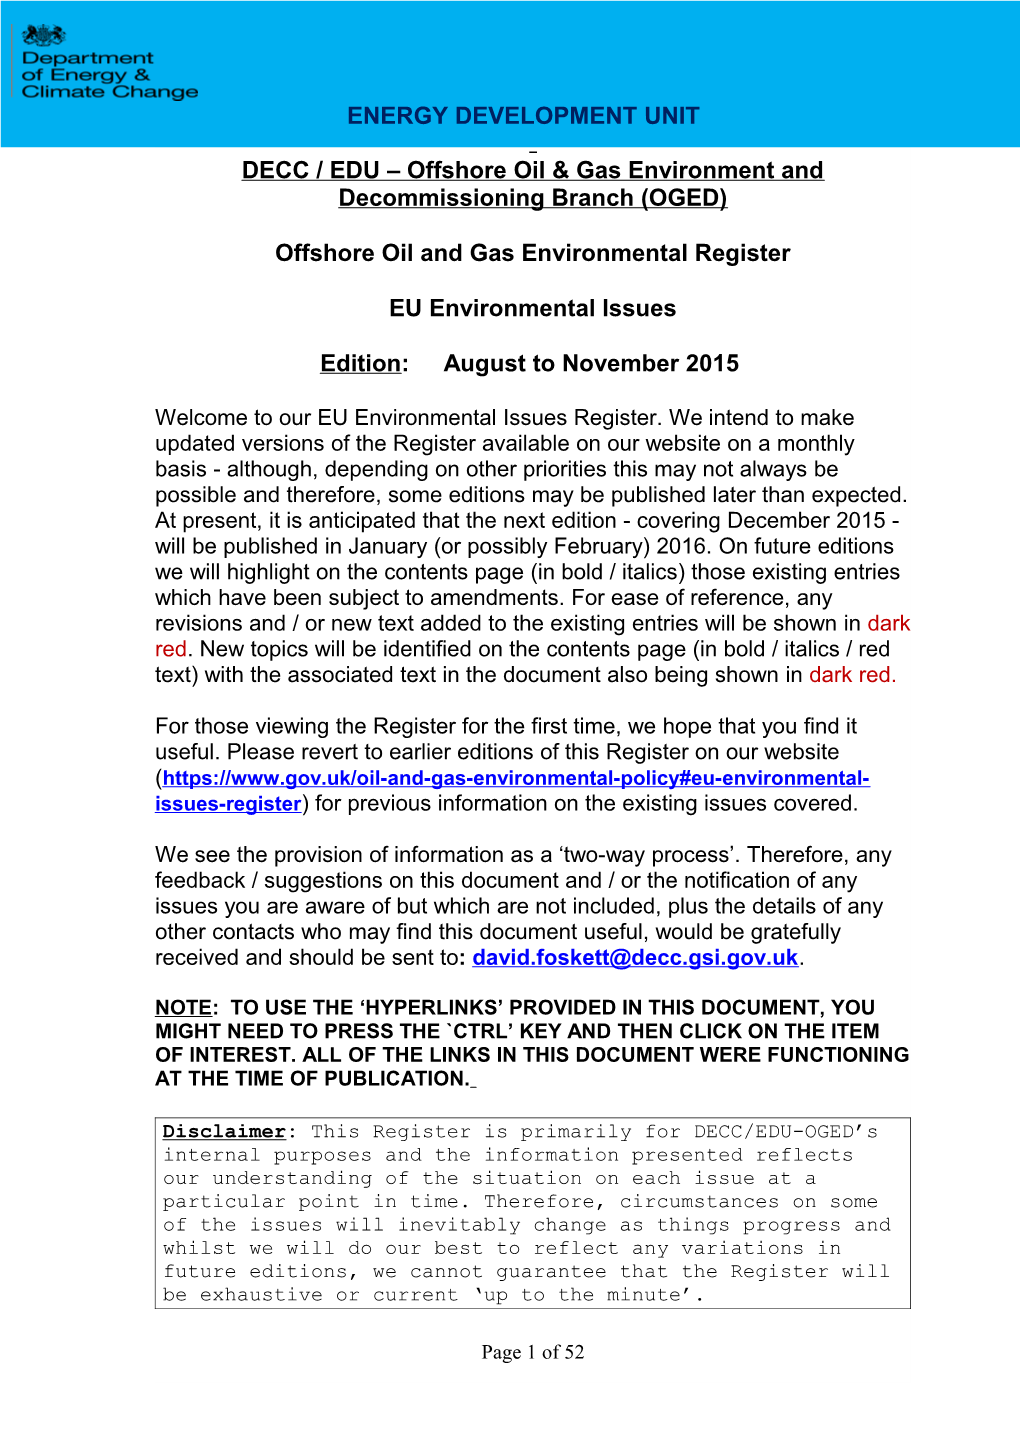 Offshore Oil and Gas Environmental Register